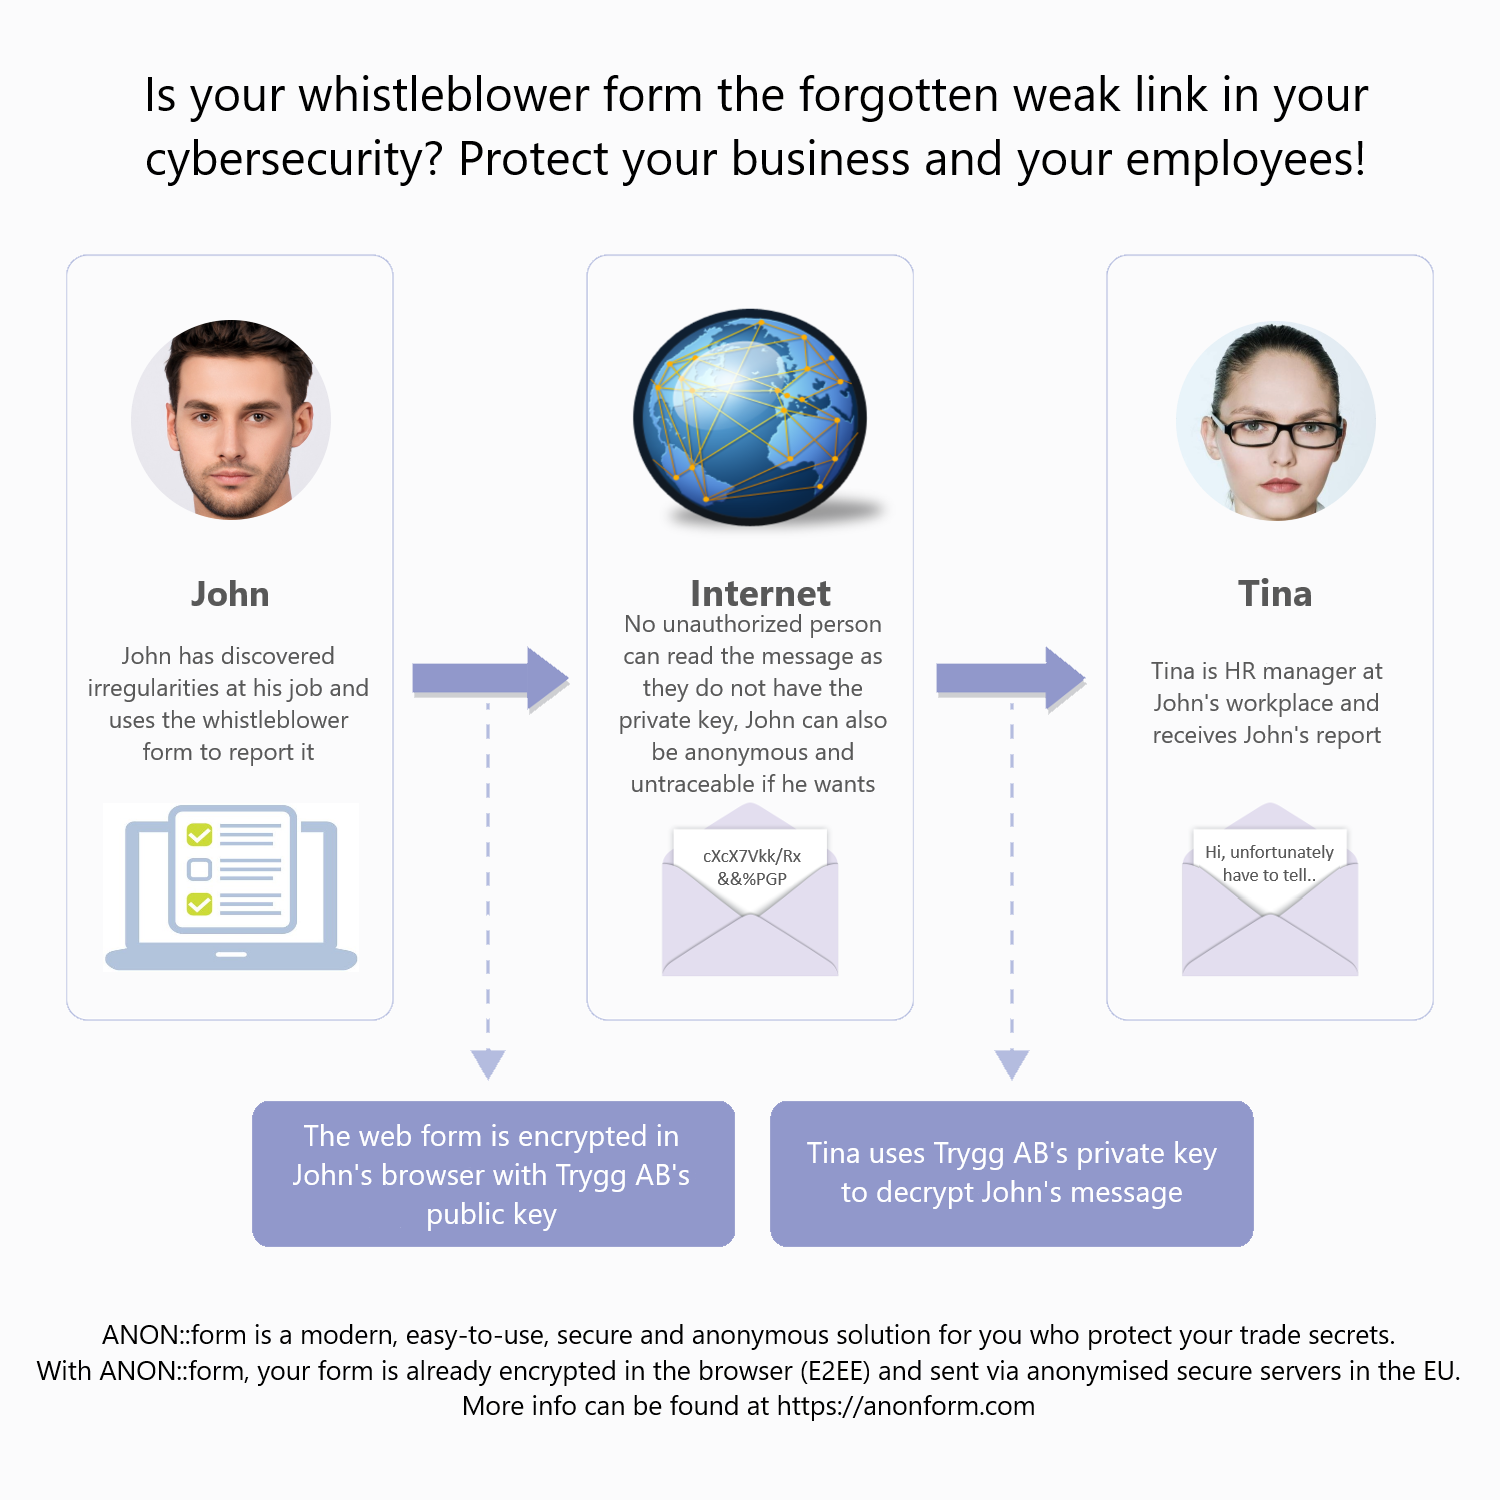 Is your whistleblower form the forgotten weak link in your cybersecurity? Protect your business and your employees!